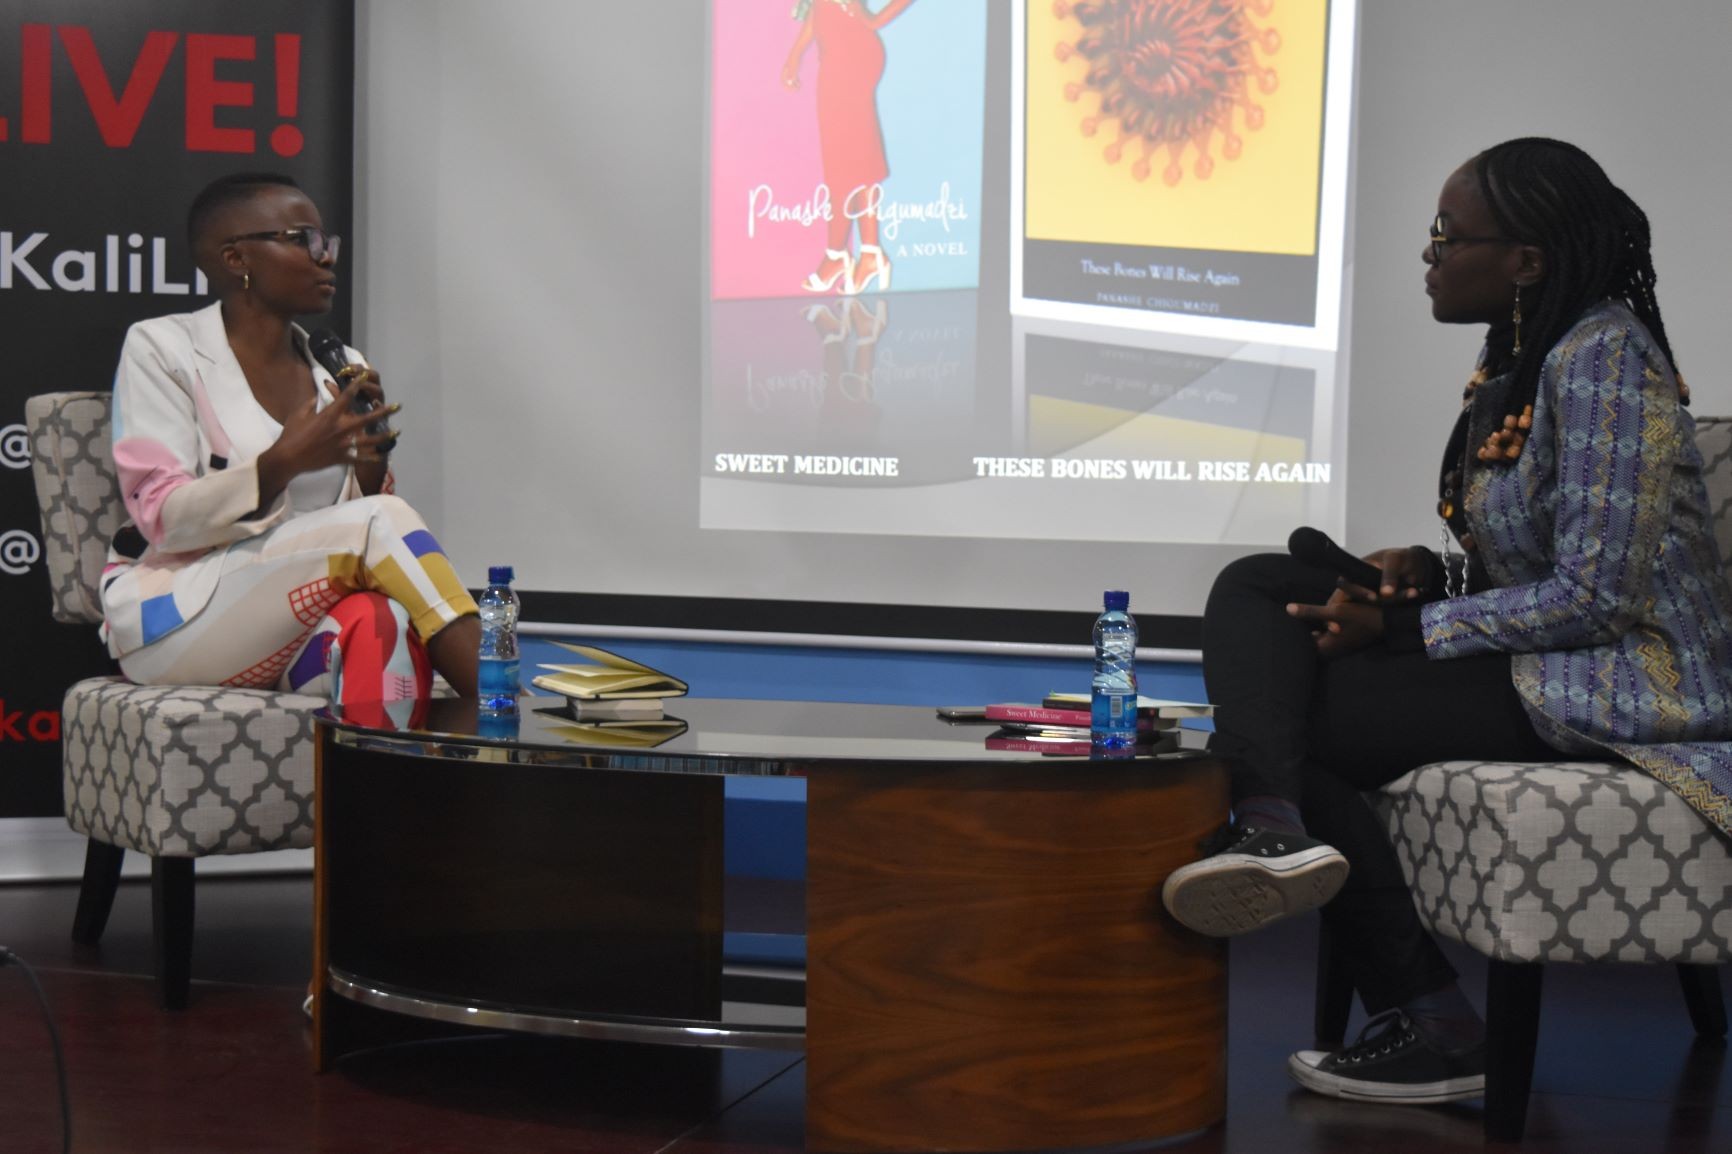 A Conversation With Author Panashe Chigumadzi based on works – ‘These Bones will Rise Again’ and ‘Sweet Medicine’